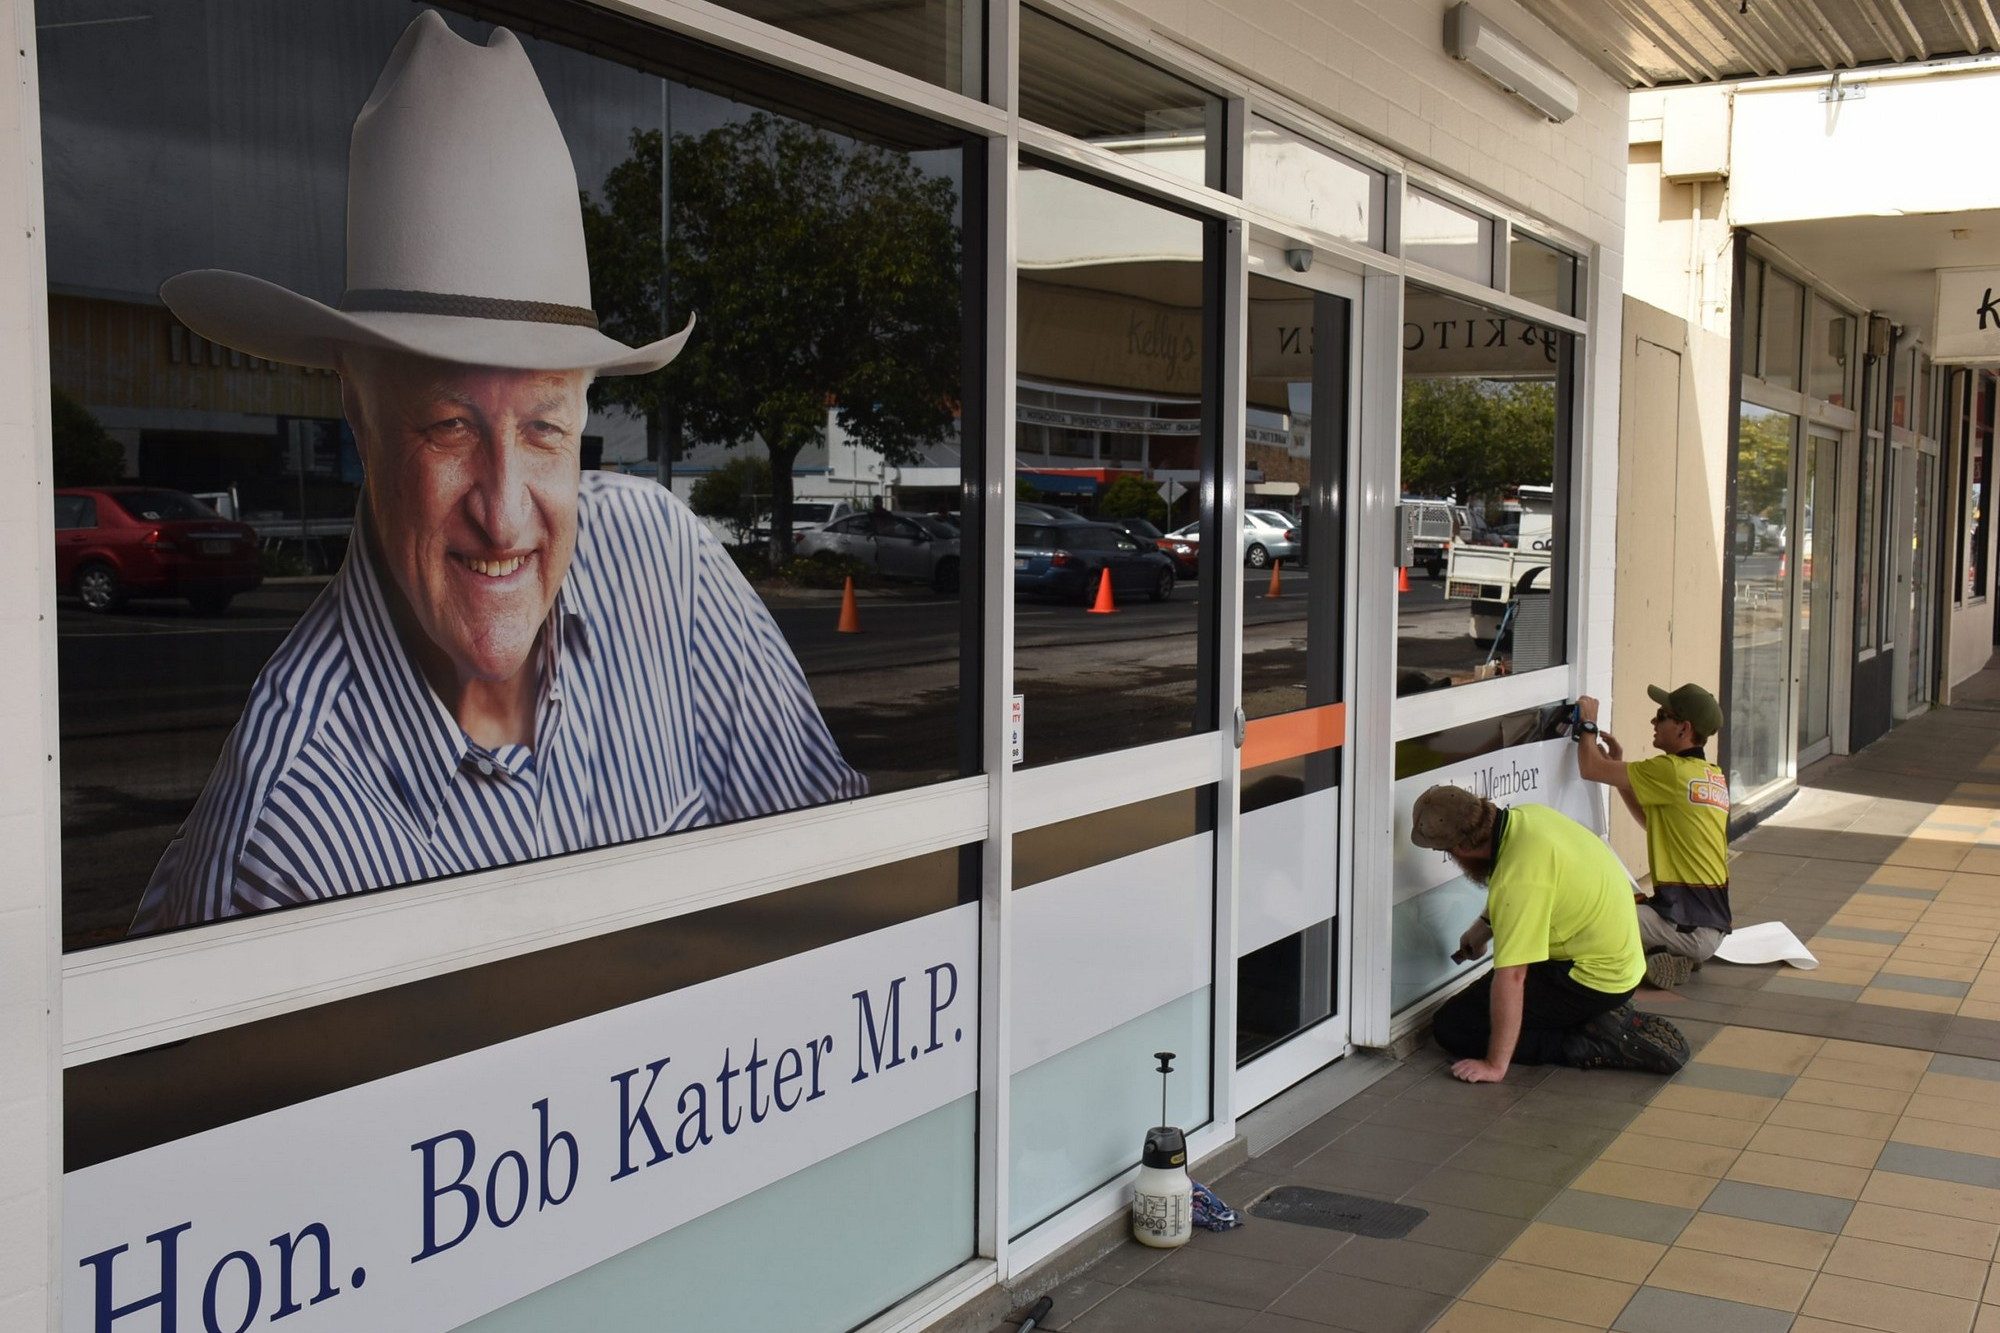 Katter office is open for business - feature photo